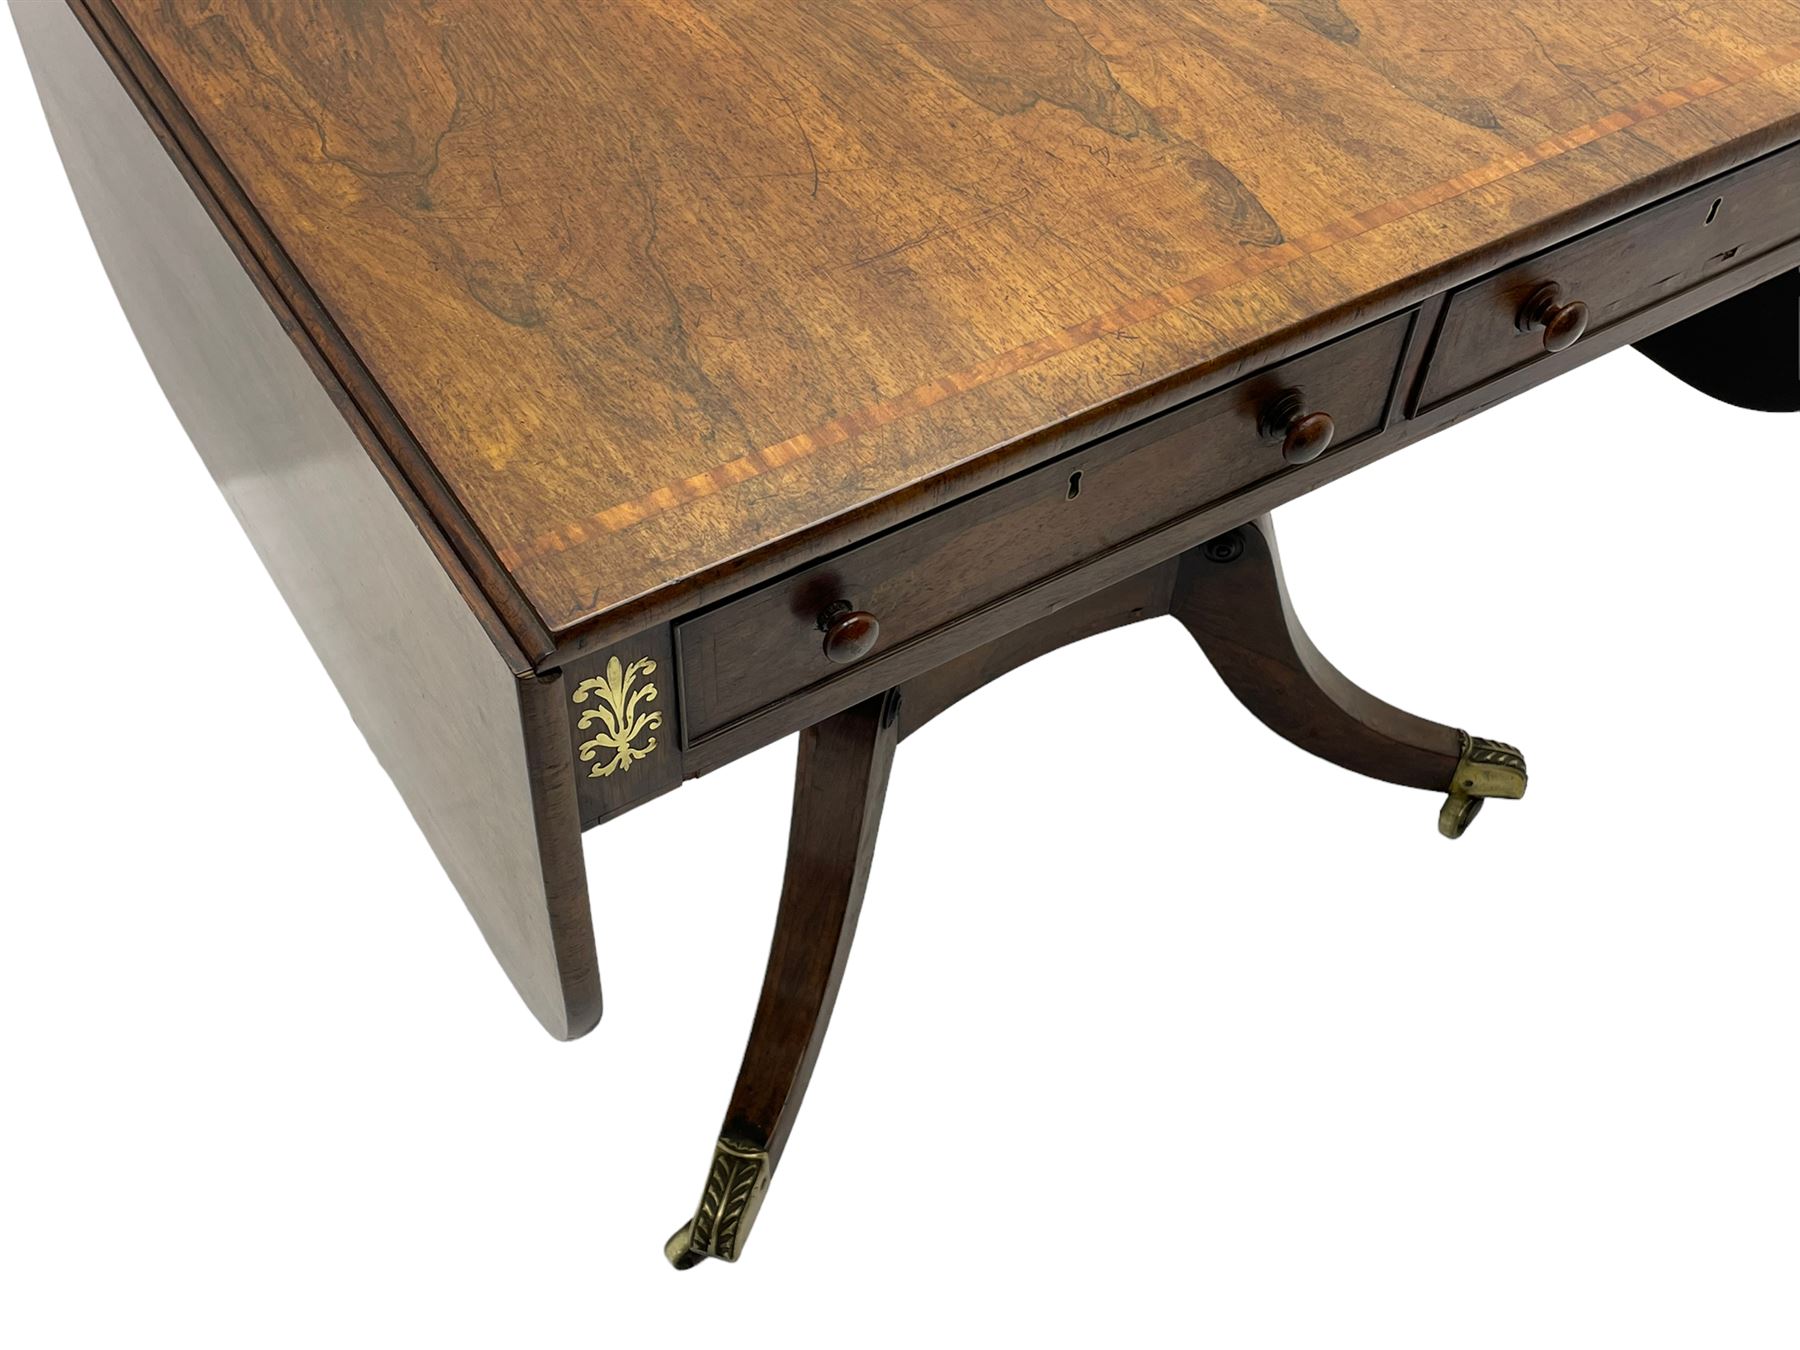 Regency rosewood and brass inlaid sofa table - Image 4 of 11